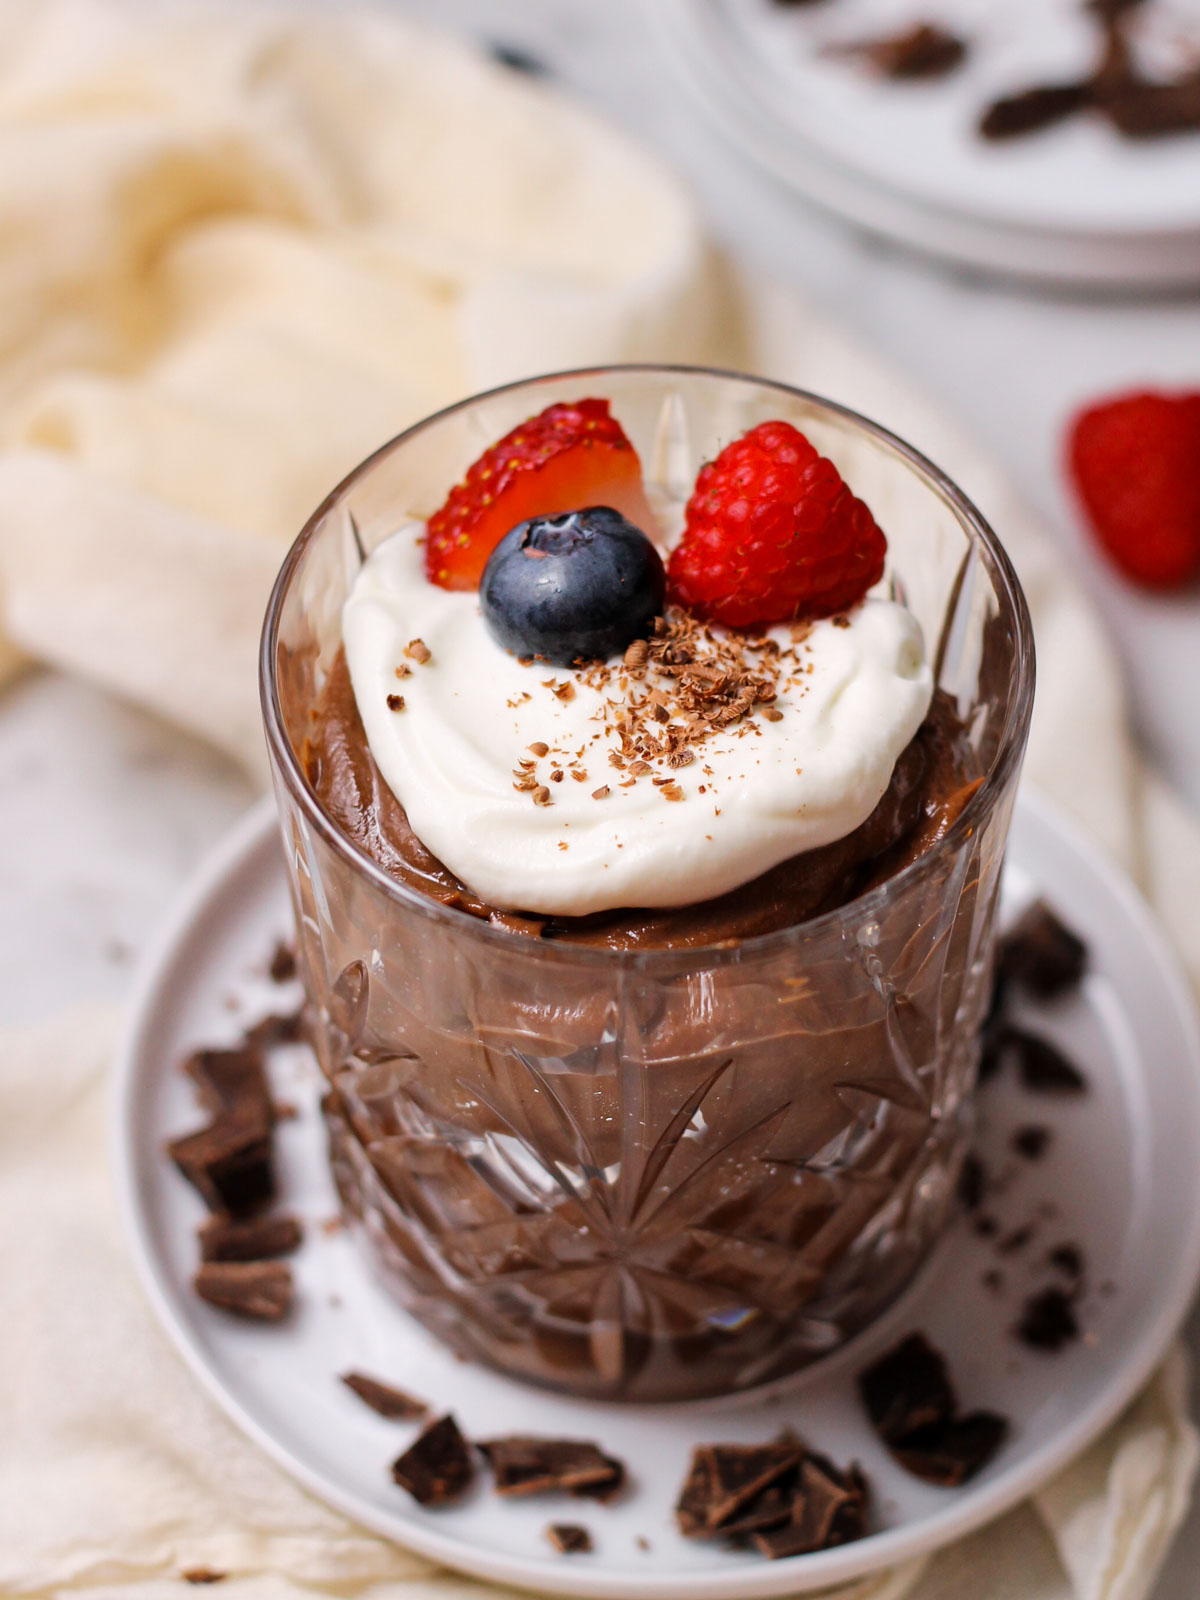 Chocolate mascarpone mousse in a small crystal glass, topped with whipped cream, chocolate shavings, and fresh berries.